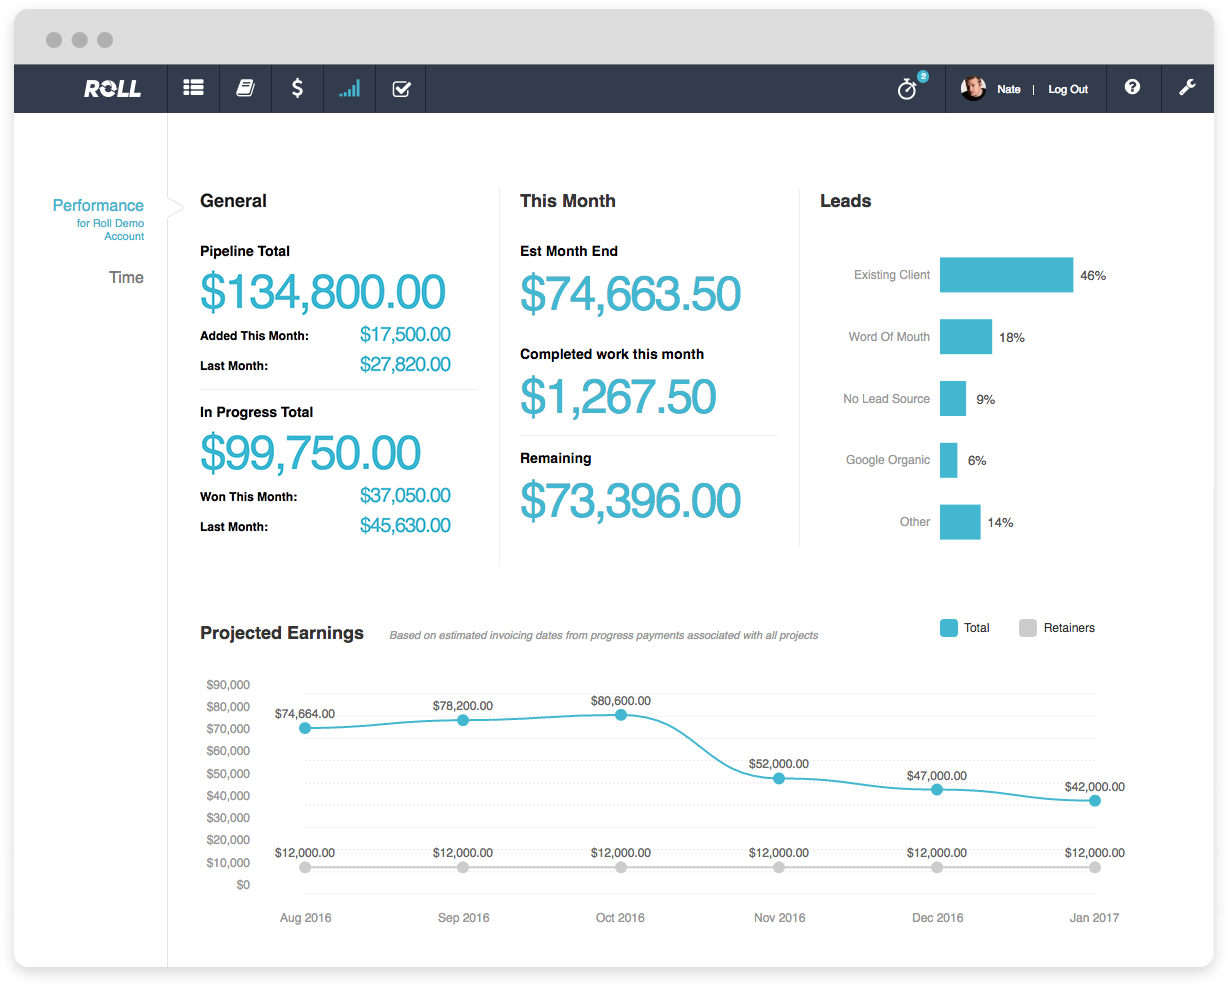 The customizable dashboard allows users to track finances and leads